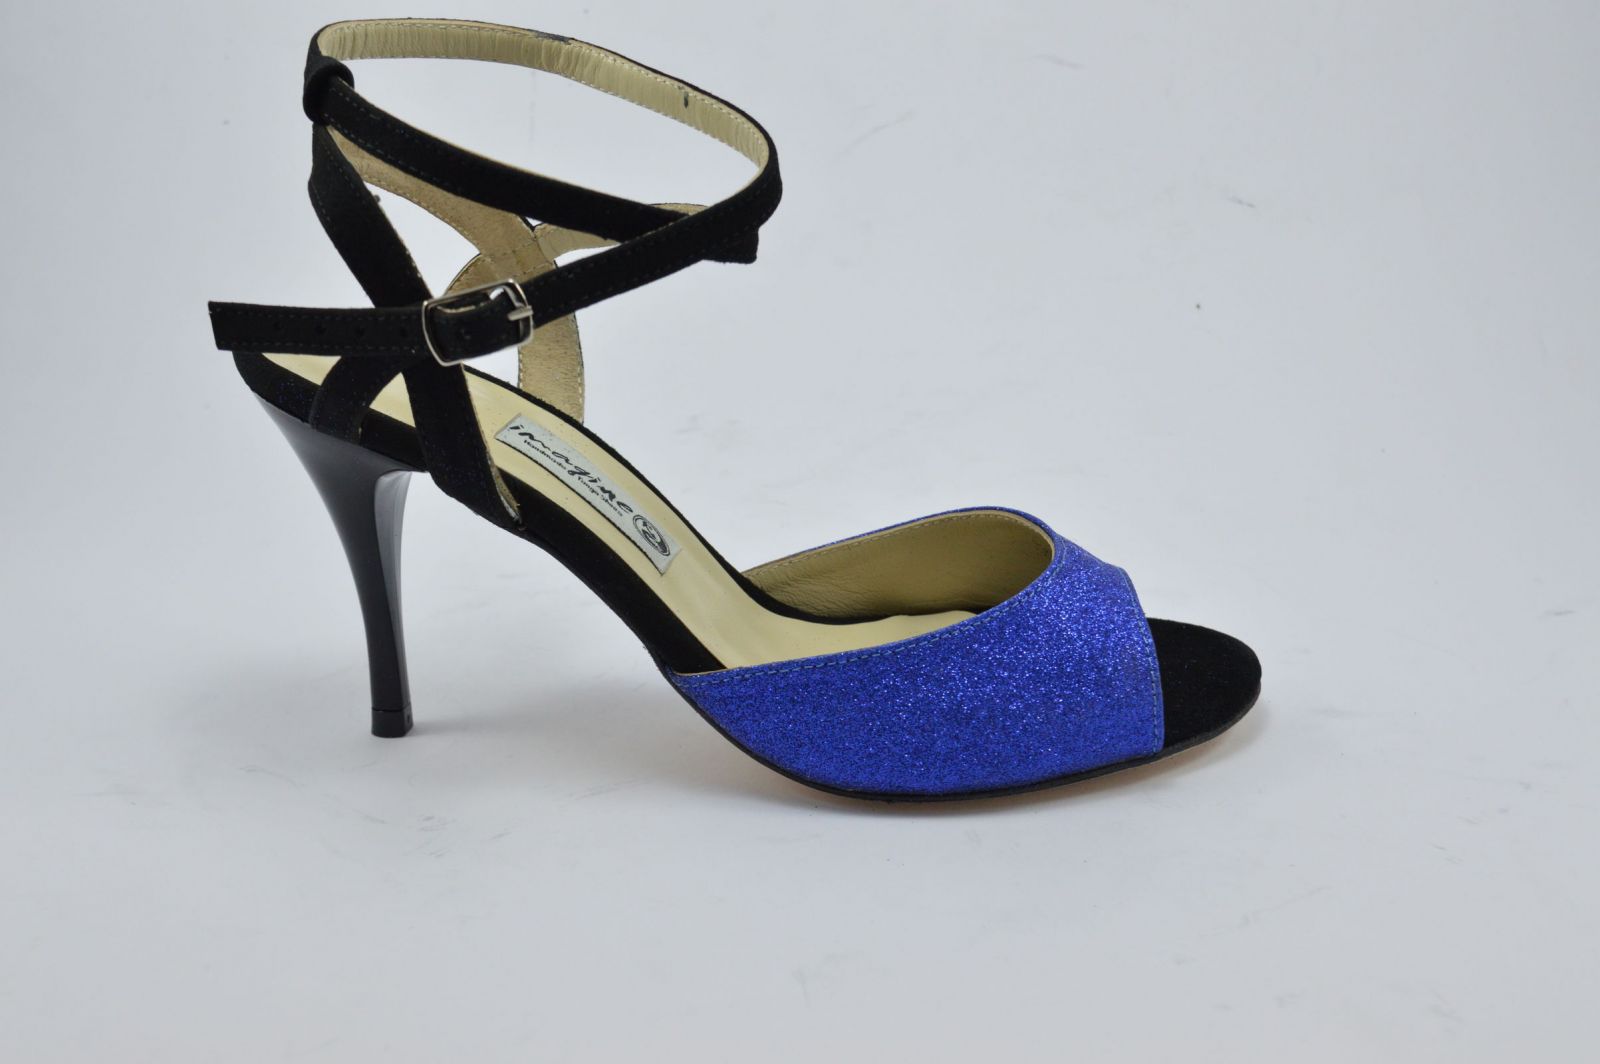 Women's tango shoe, open heel, in black suede leather and royal blue glitter